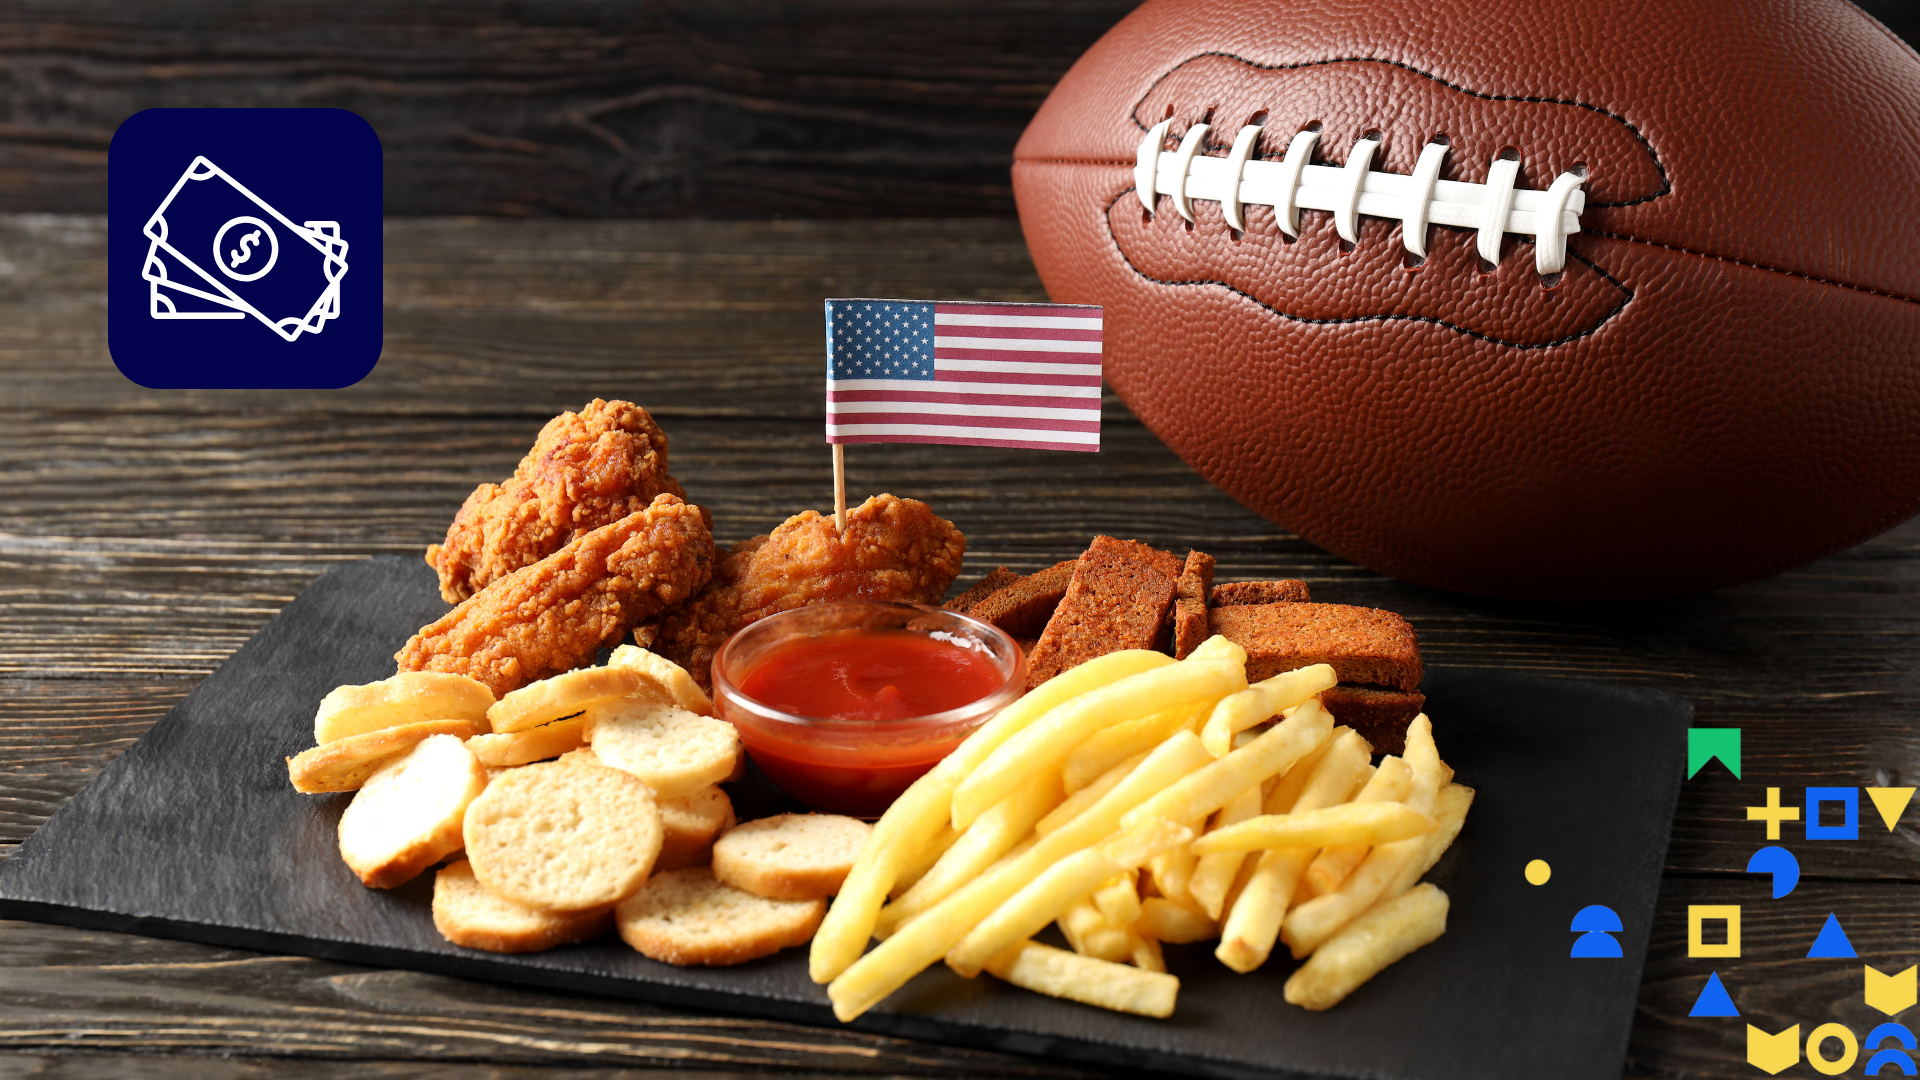 Image of a plate of snacks with an American flag next to a football overlaid with blue, green, and yellow geometric glyphs and an icon of cash